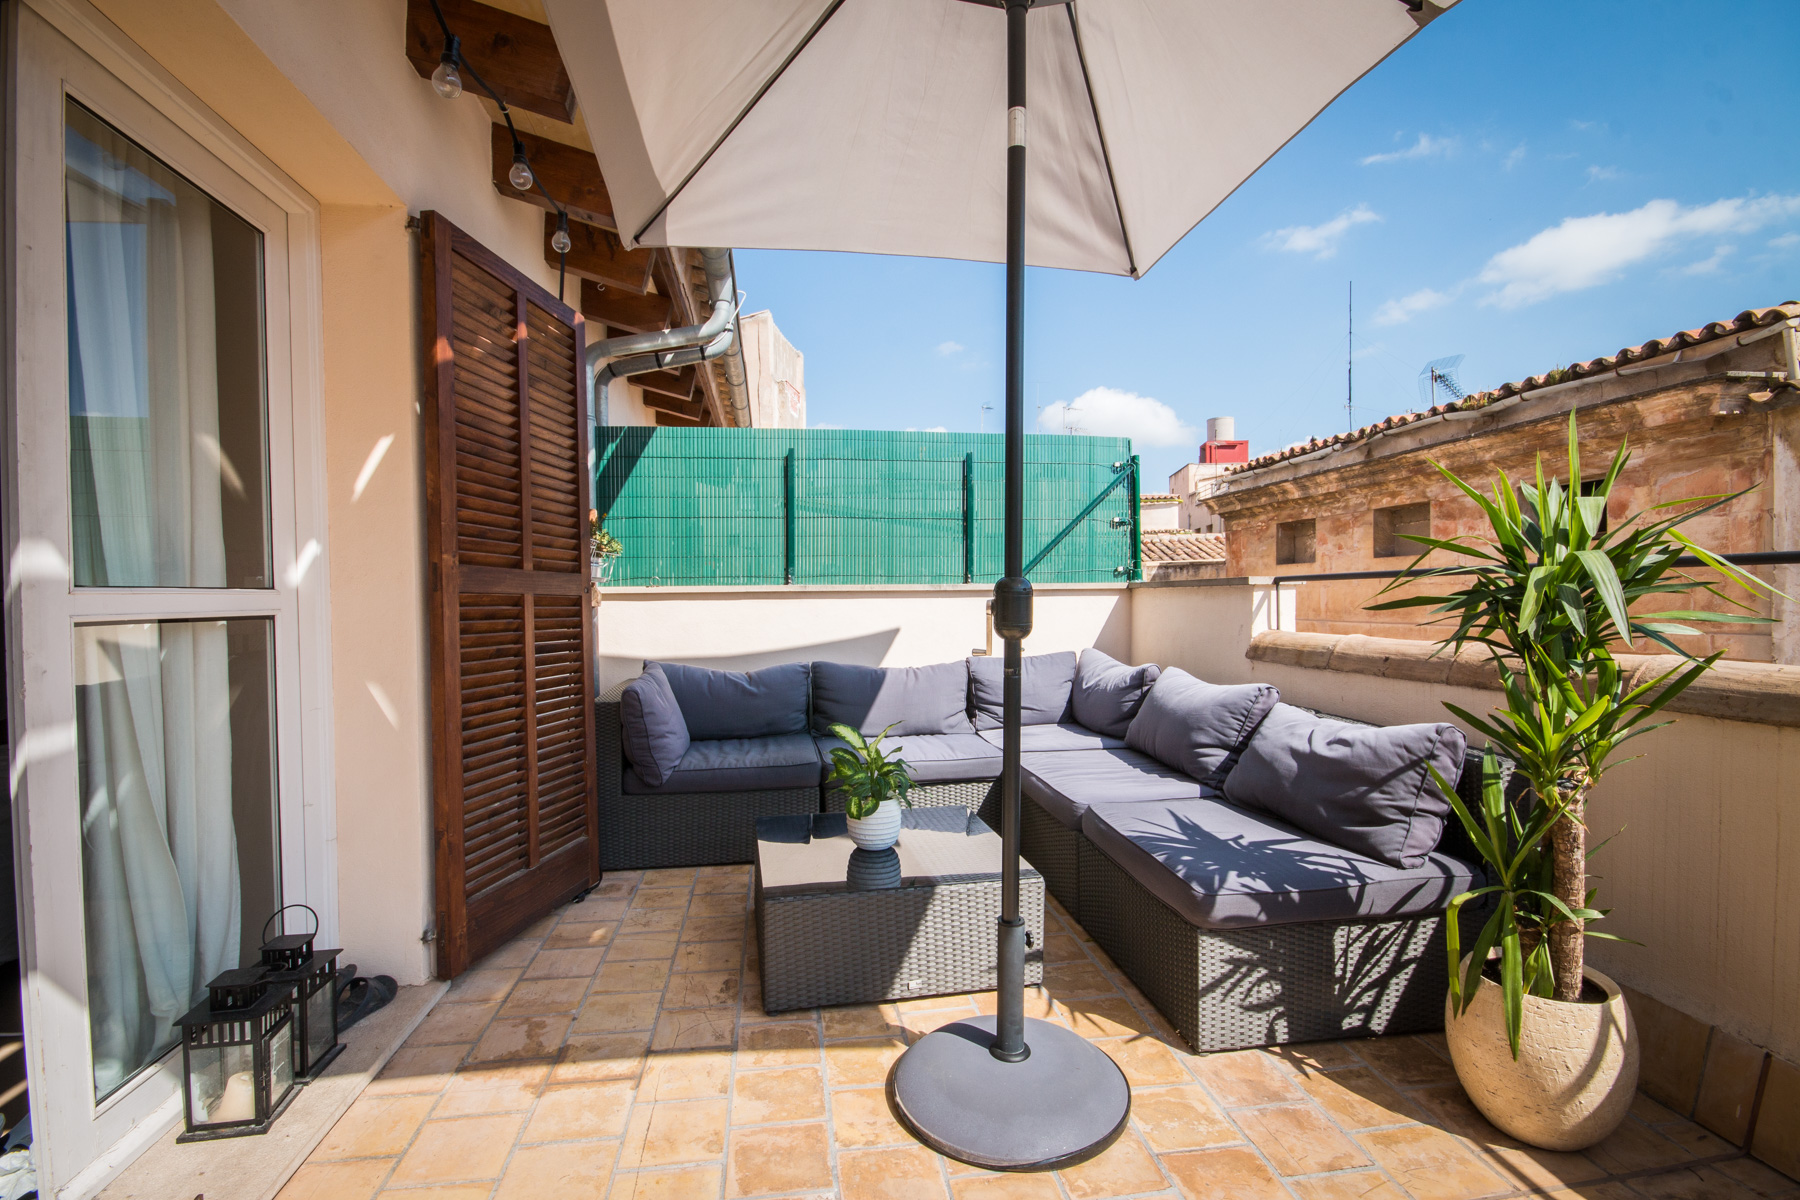 andreas-linden-palma-old-town-terrace-2